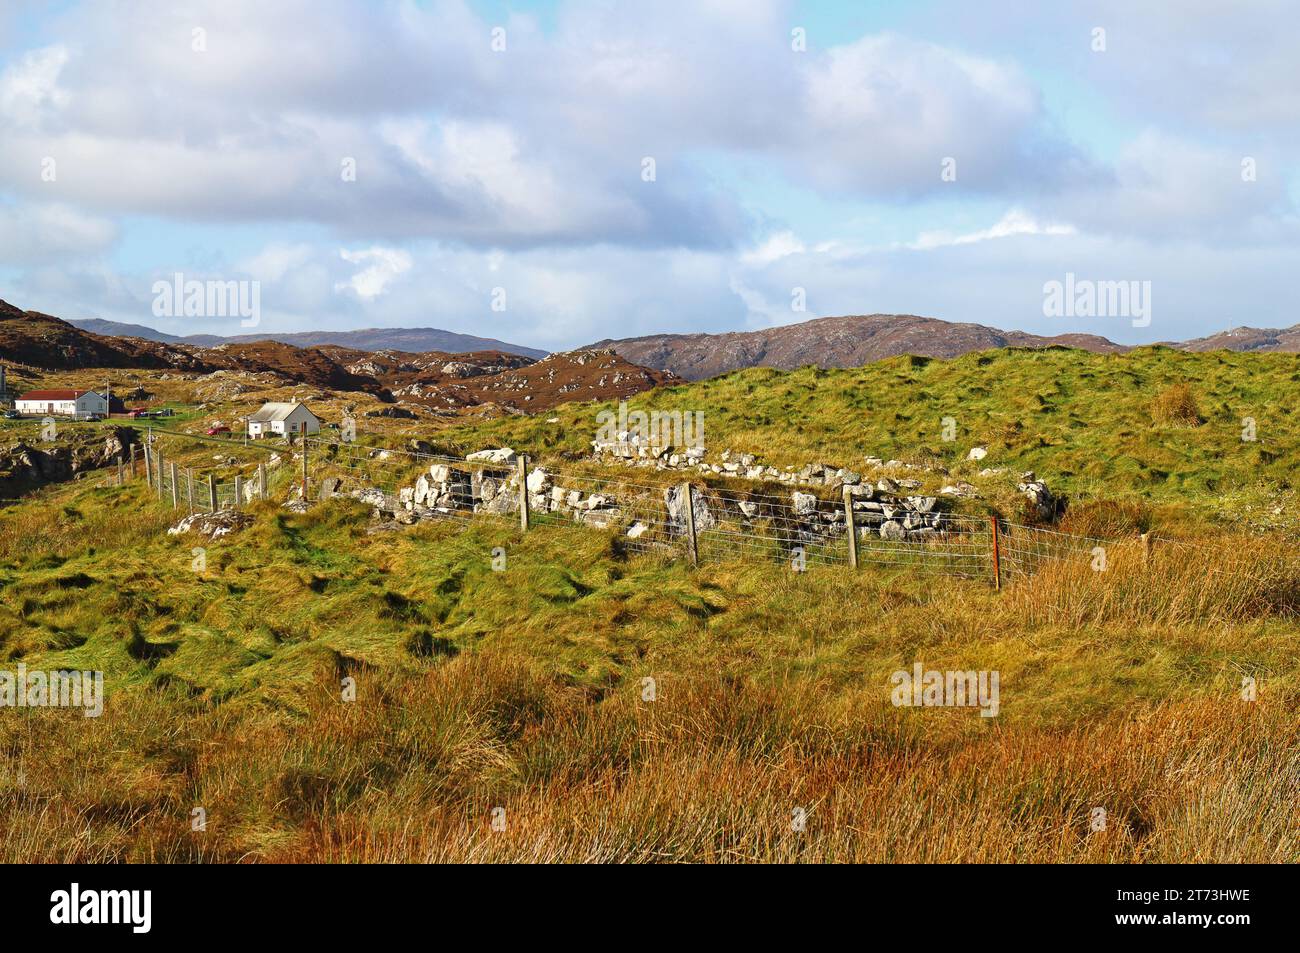 The remains of a small croft building possibly abandoned due to clearances by the Golden Road on the Isle of Harris, Outer Hebrides, Scotland. Stock Photo